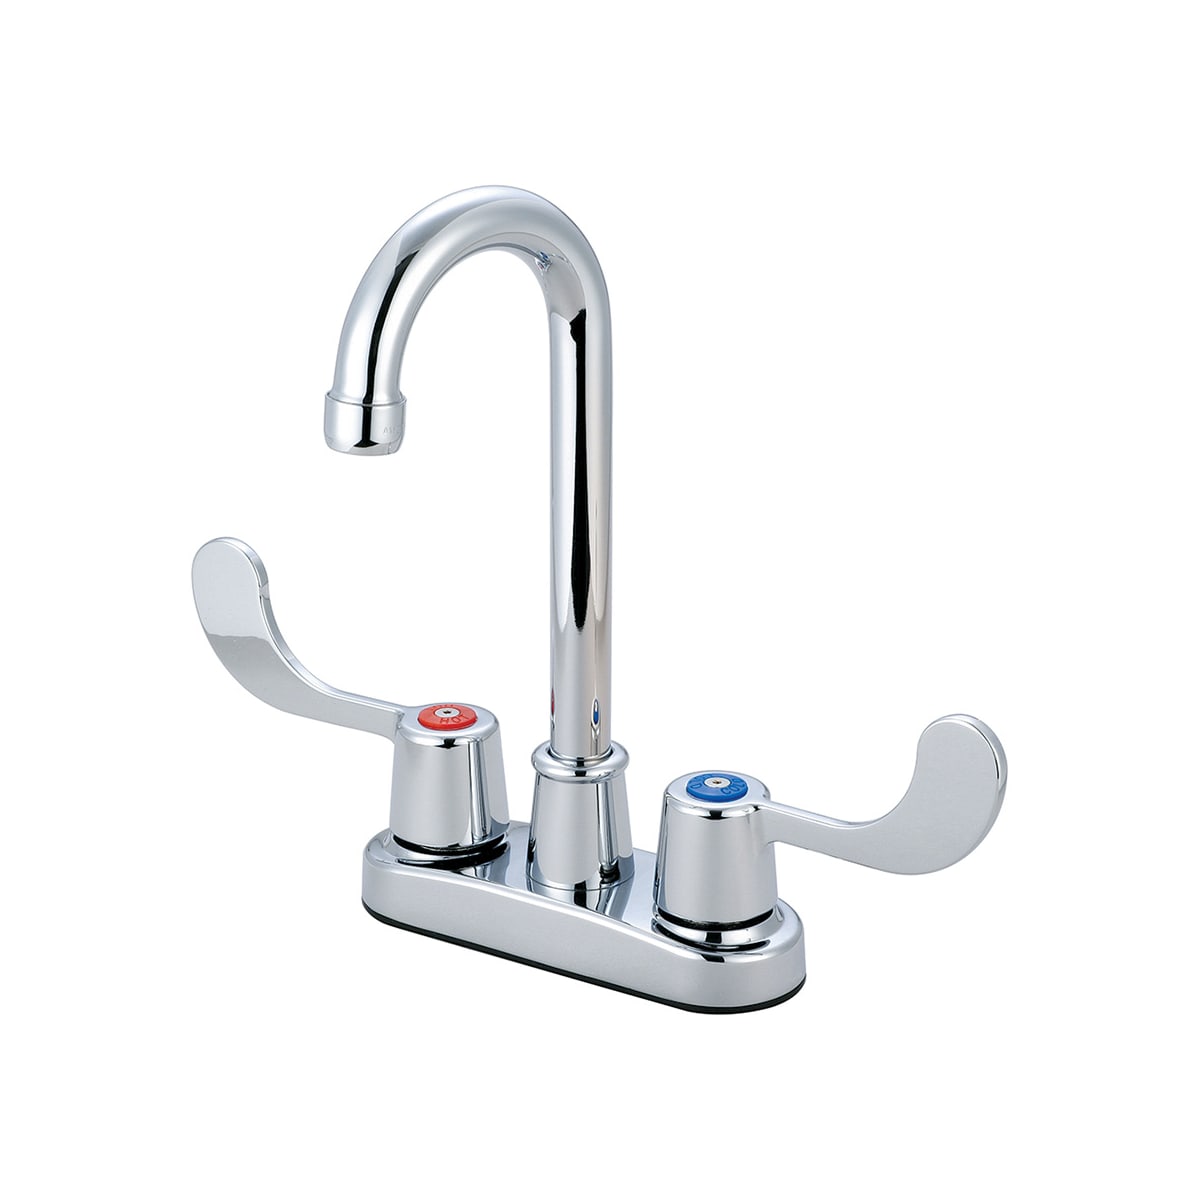 Olympia Faucets B-8190 Two Handle Laundry Faucet Chrome Finish for sale online